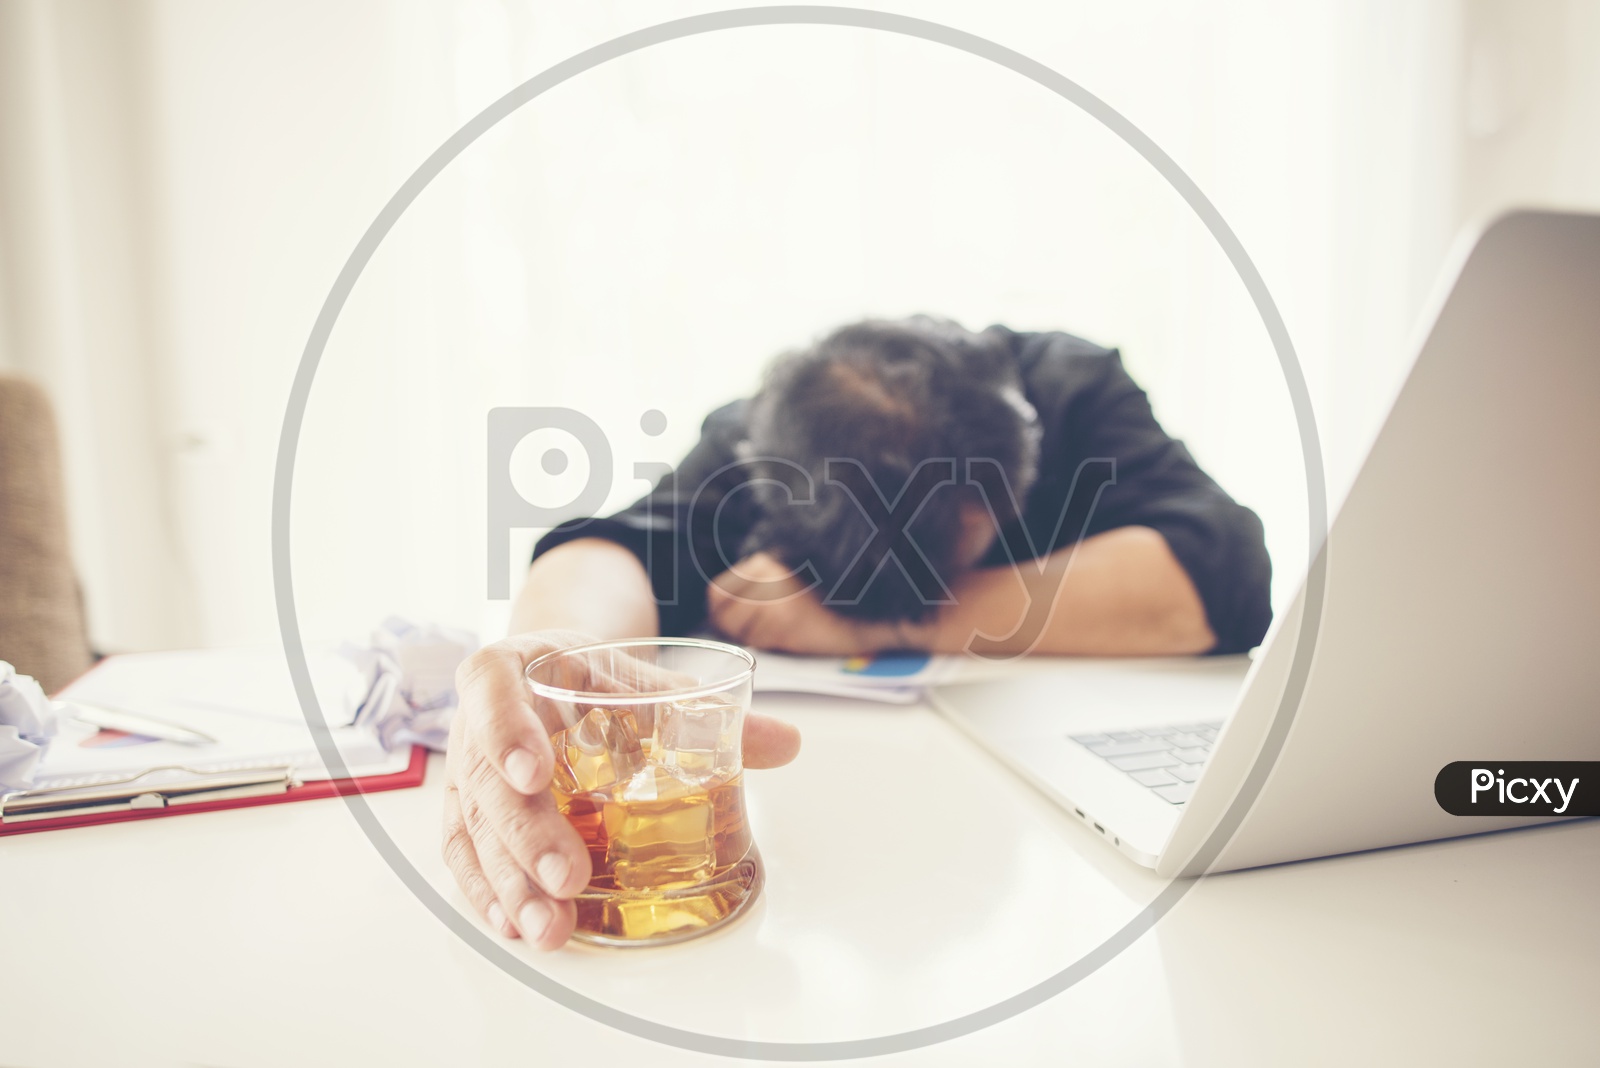 Depressed  Business Man Addicted to Alcohol With Alcohol Glass At Office Desk